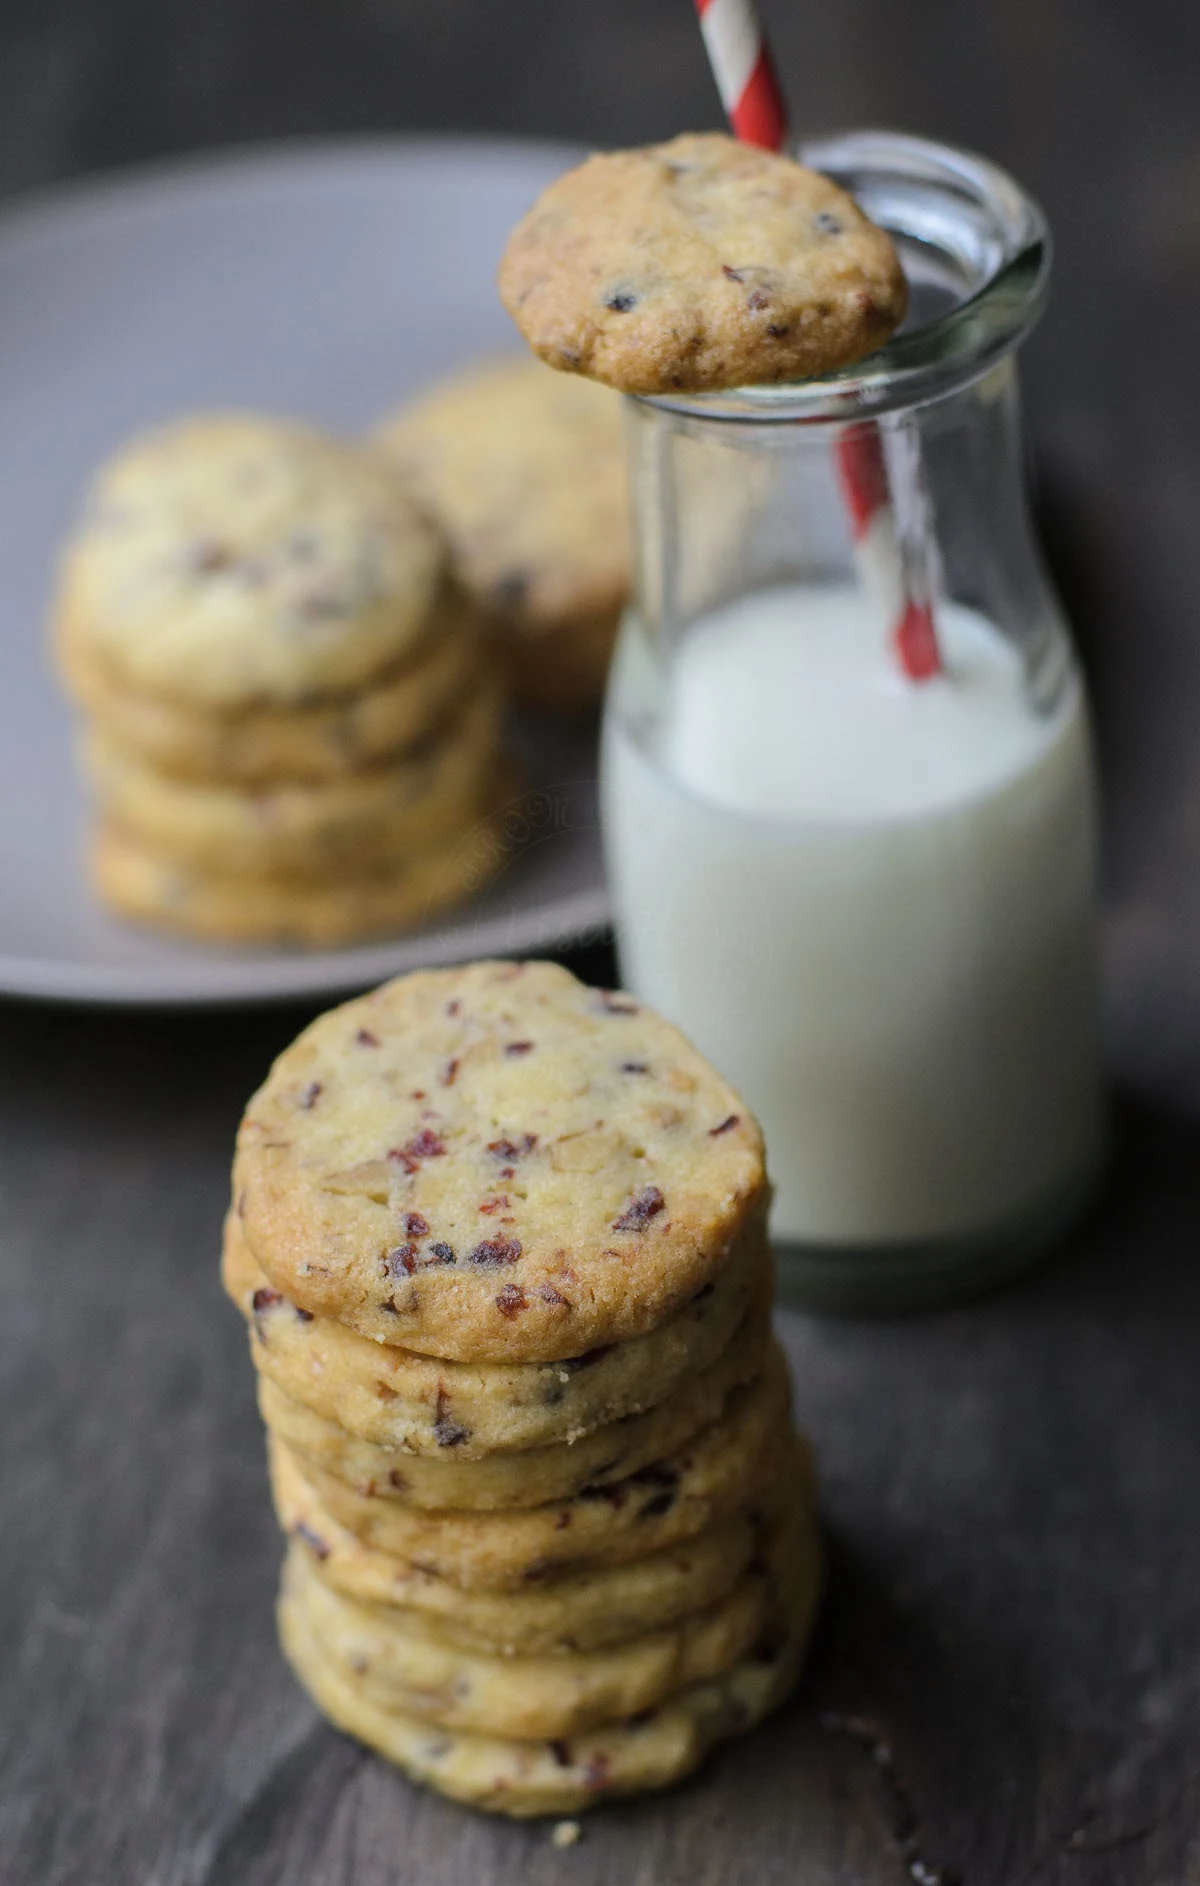 These cranberries and walnut cookies makes an excellent gifts for families and friends this Christmas.